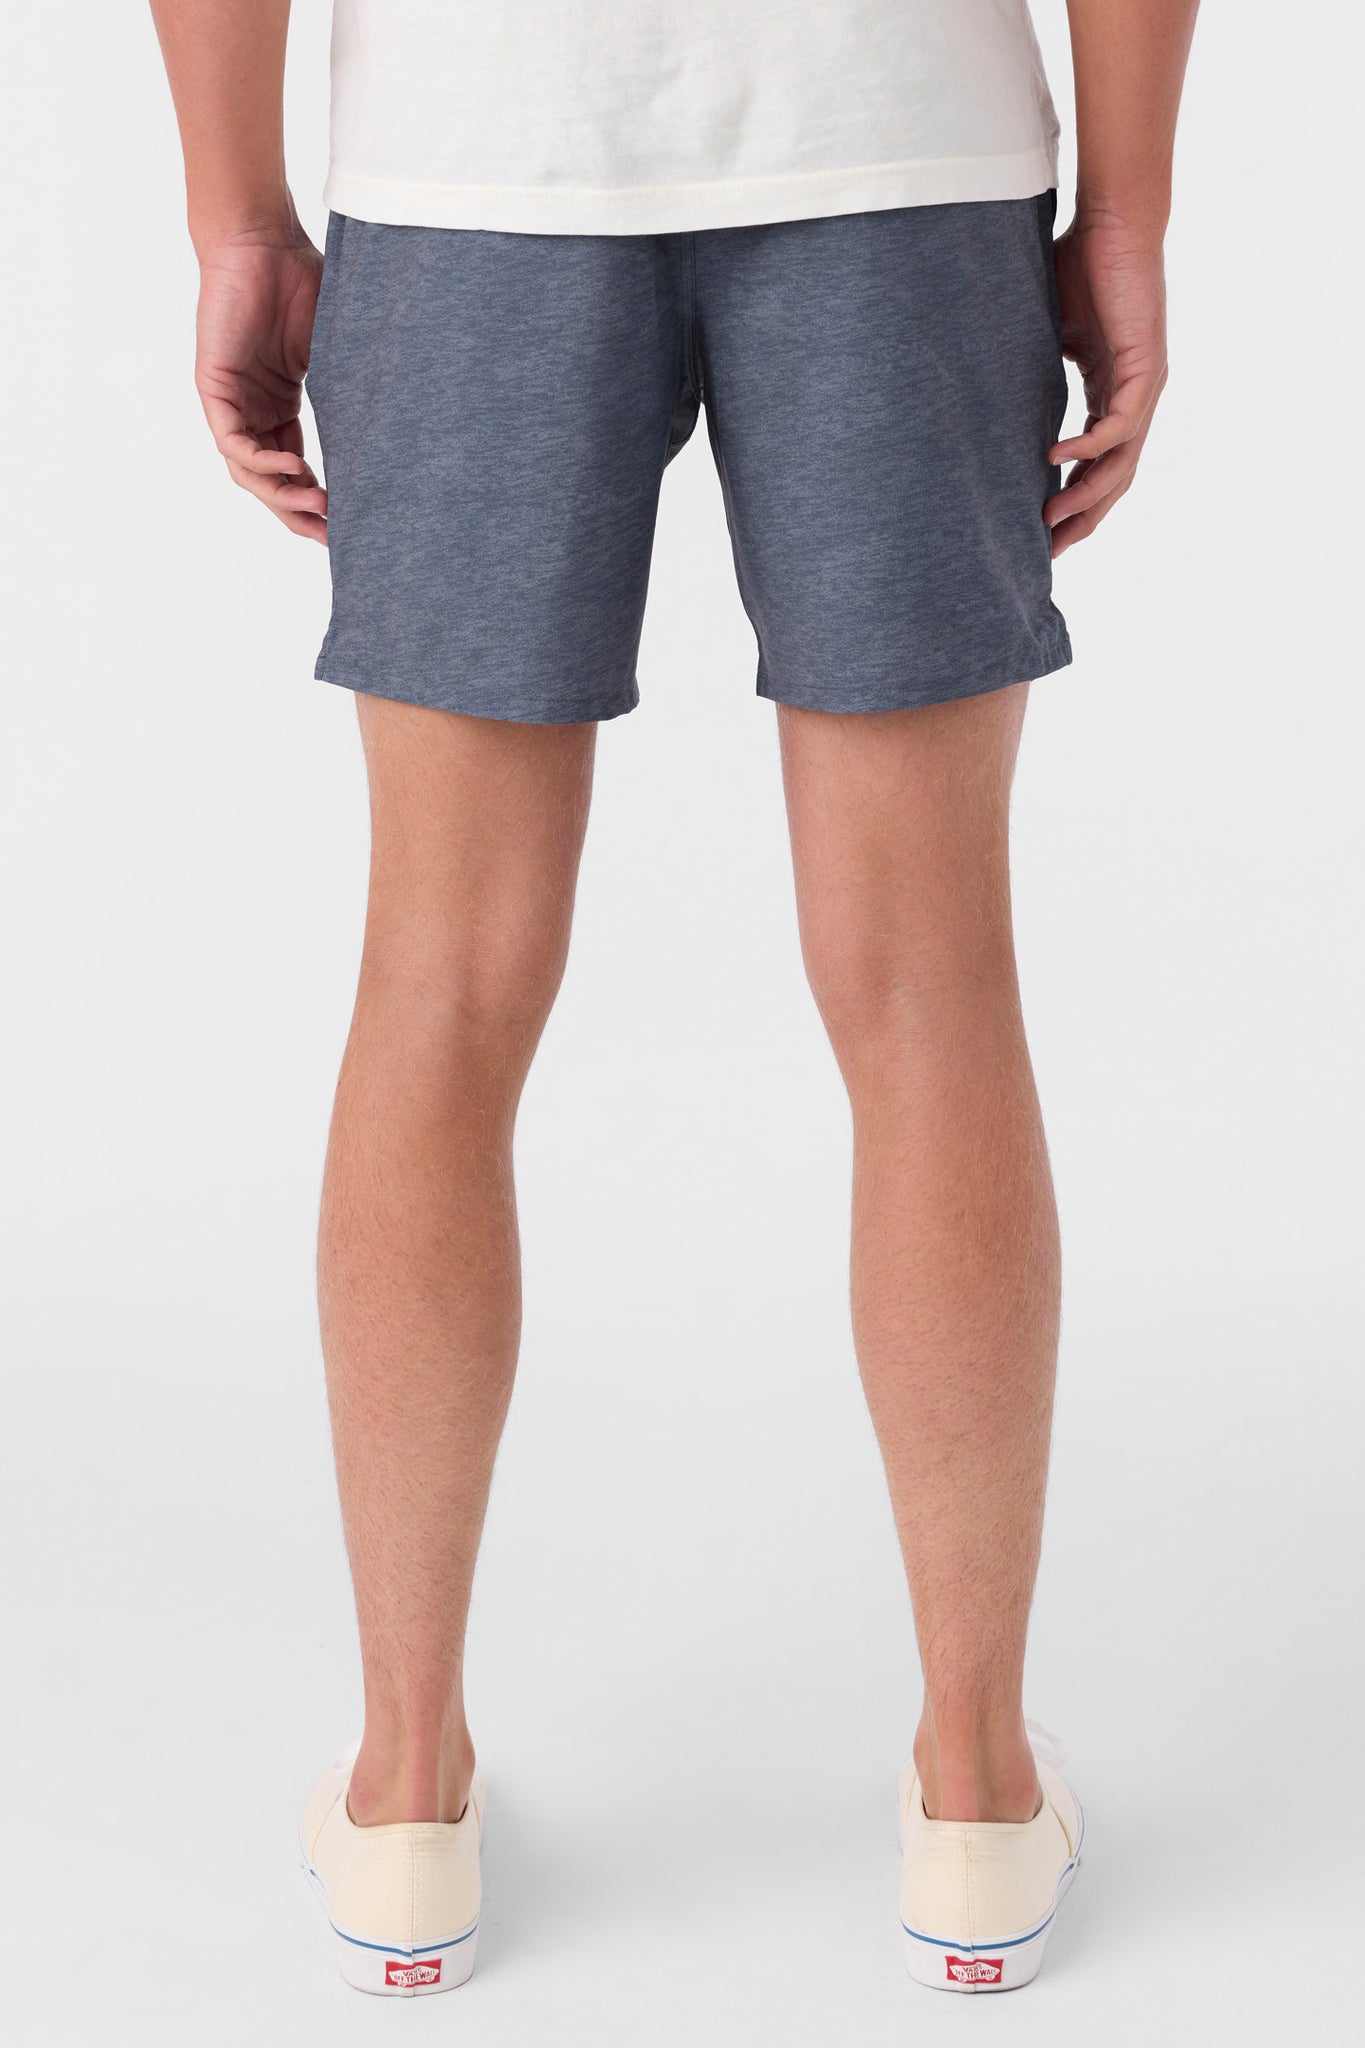 PERFORM LINED 17" ATHLETIC SHORTS